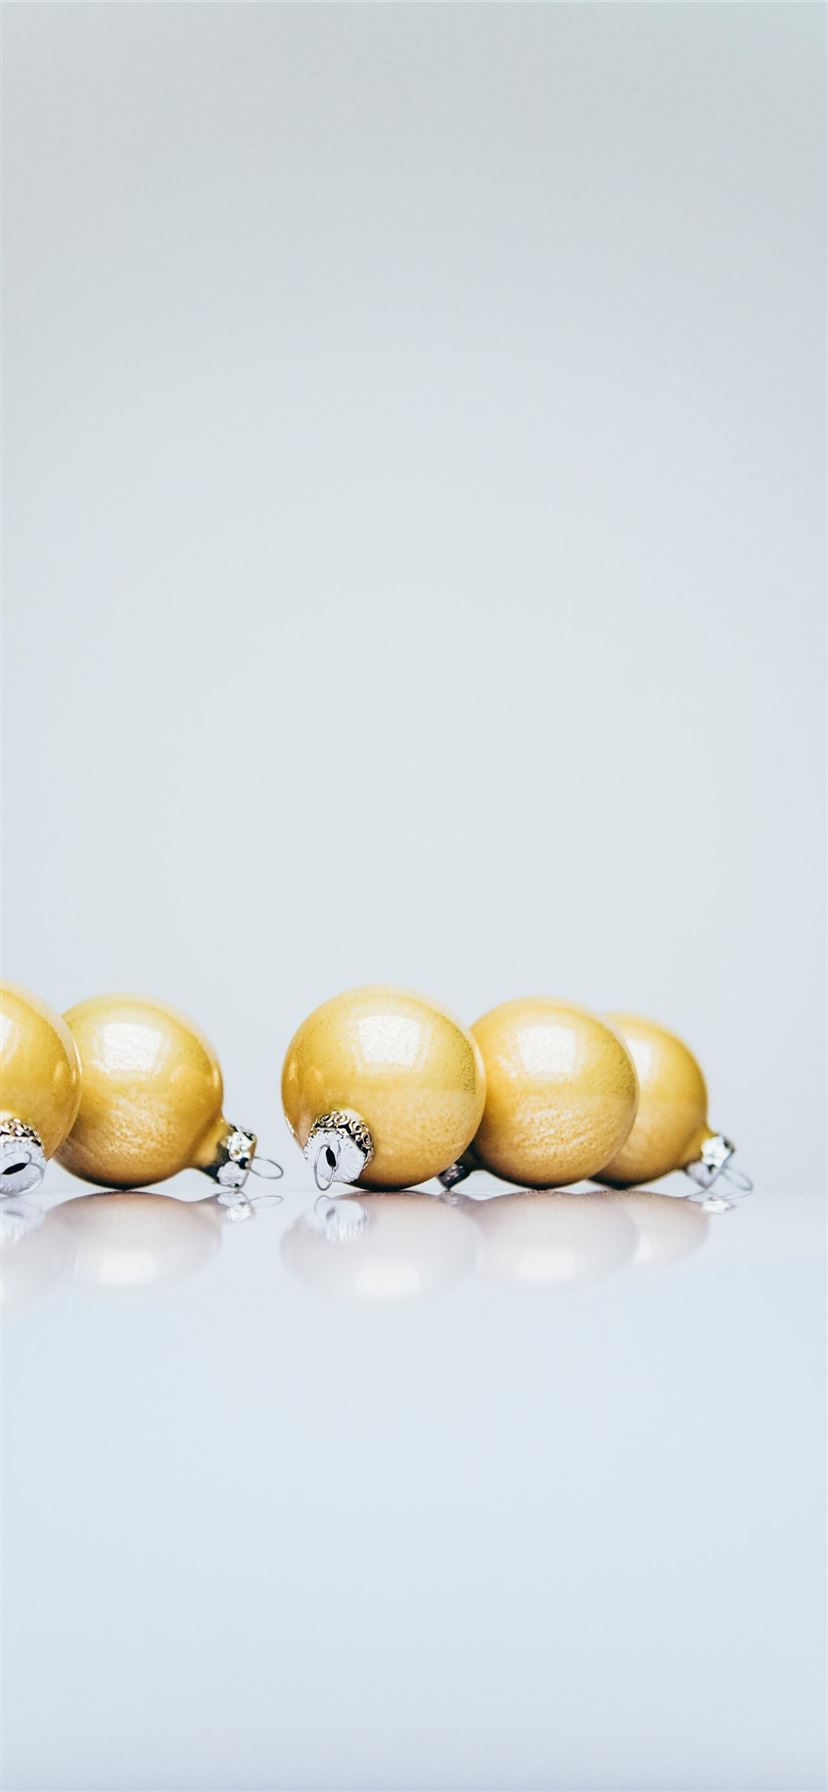 six gold Christmas baubles on white wooden surface iPhone 11 wallpaper 